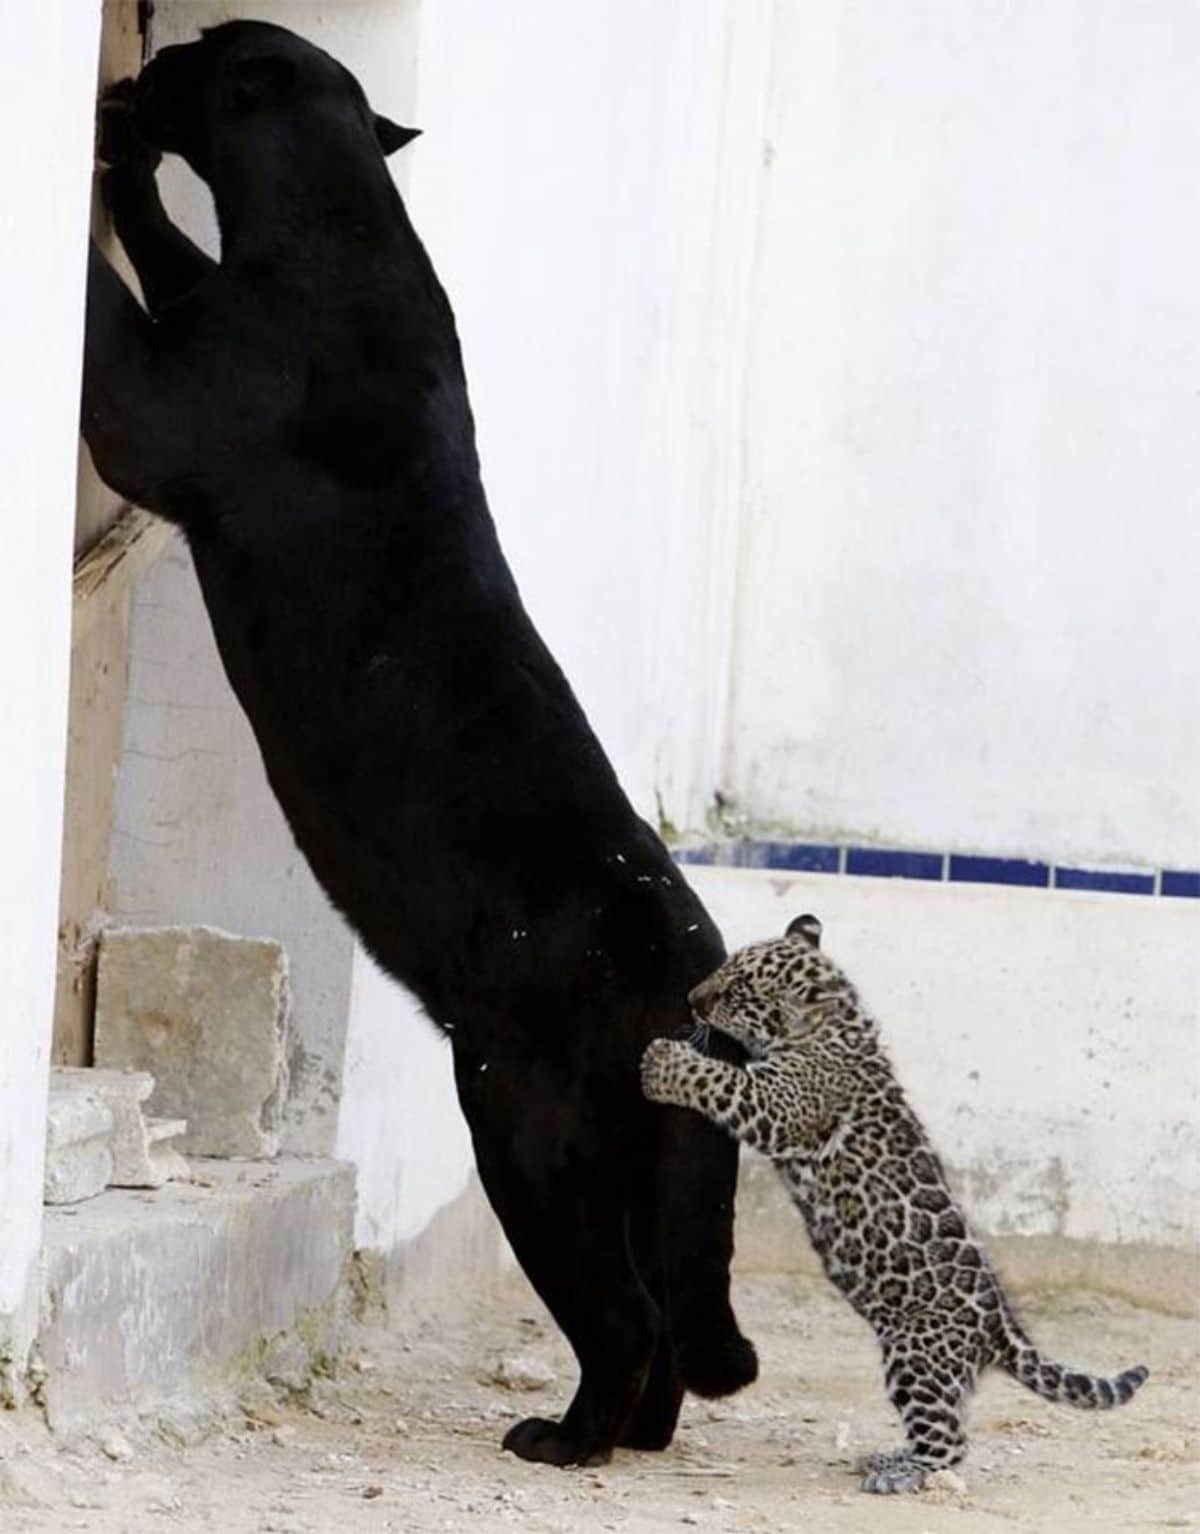 black panther standing on hind legs and standing against a wall with a leopard cub standing on hind legs and biting the panther's tail